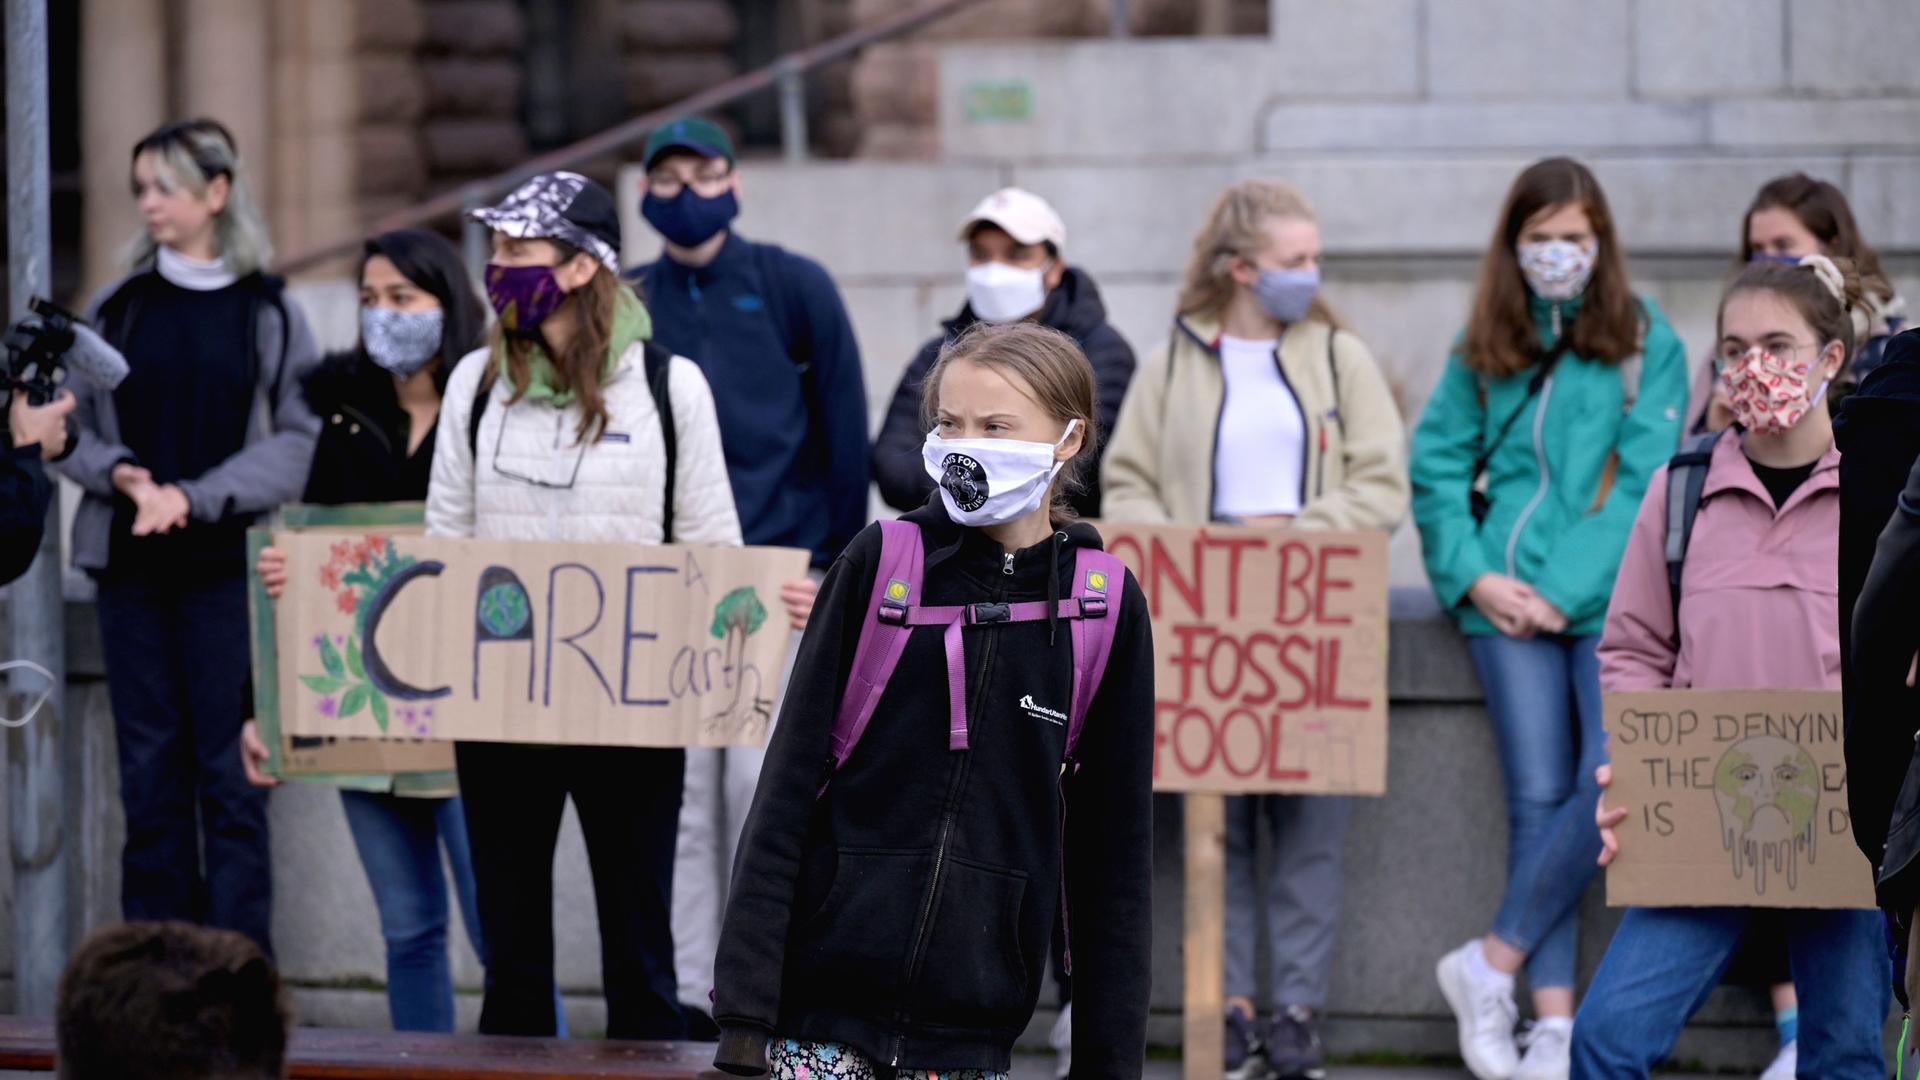 Swedish climate change activist Greta Thunberg is shown standing among a group of activists and wearing a purple backpack and a face mask.